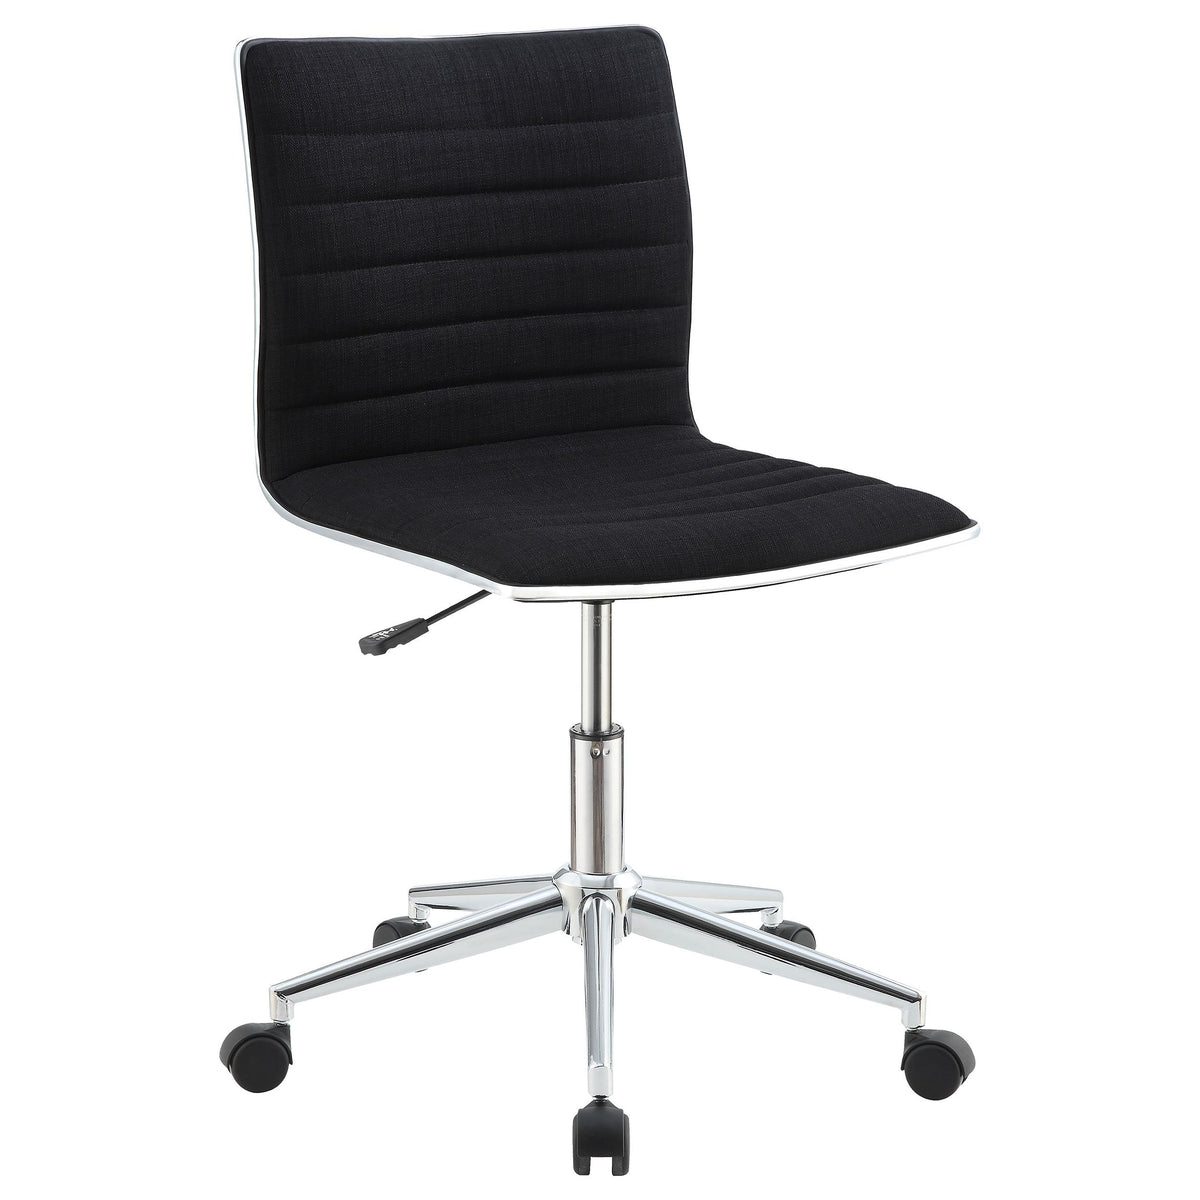 Chryses Adjustable Height Office Chair Black and Chrome  Las Vegas Furniture Stores